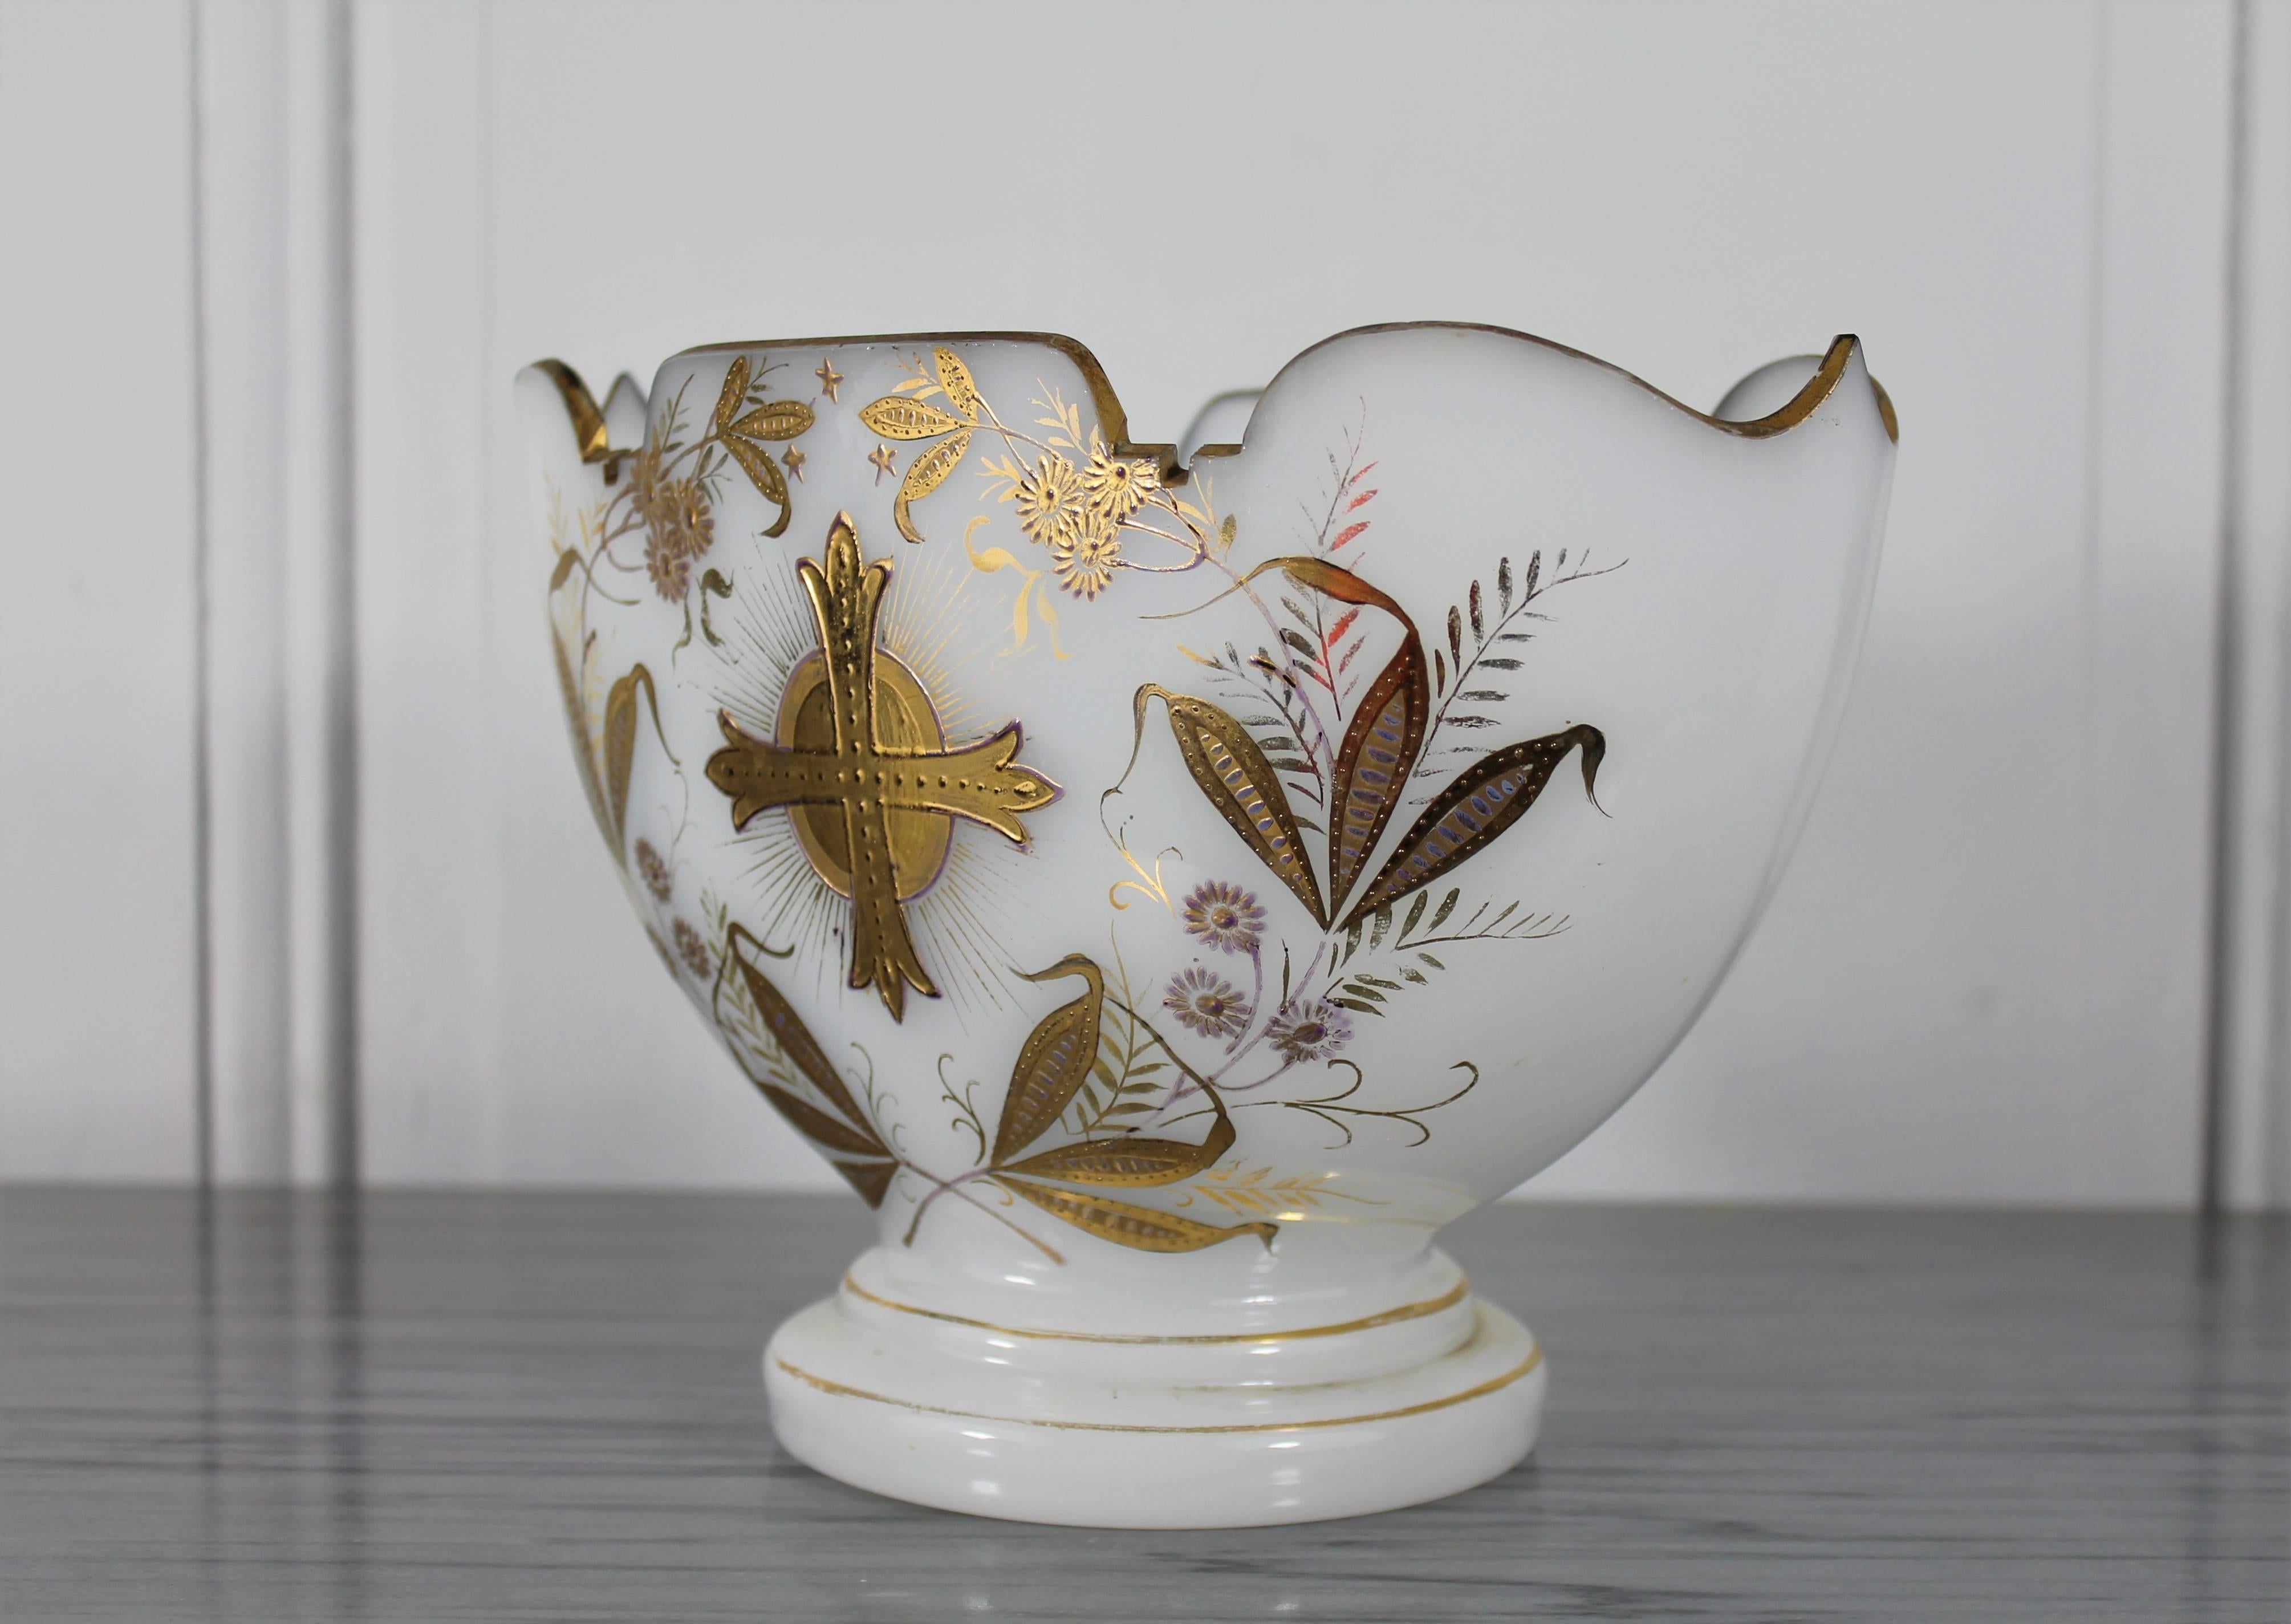 19th Century Cup, Planter, Wedding Cup, vase - Opaline Glass Gilded with Fine Gold For Sale